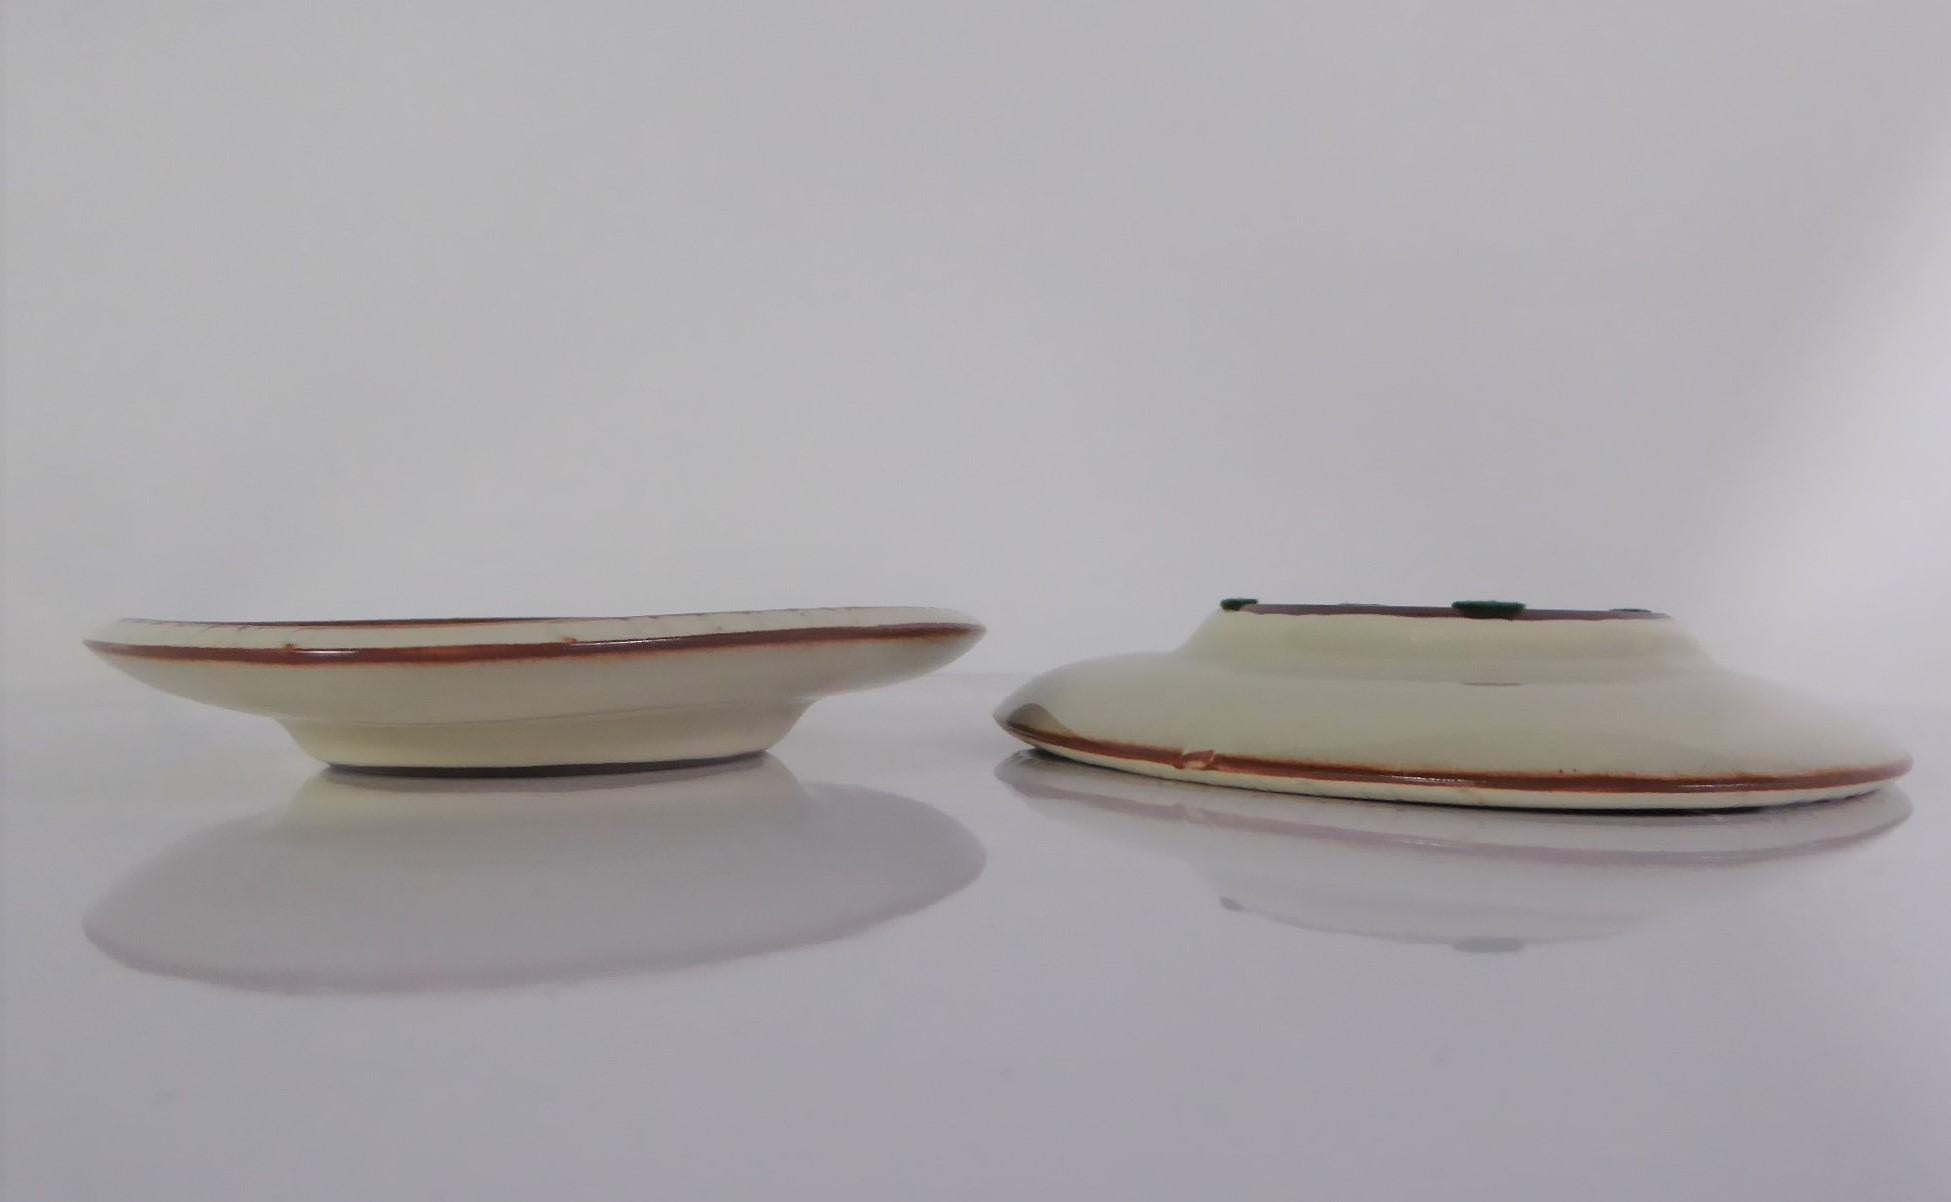 REDUCED FROM $195....Scandinavian Mid-Century Modern Danish hand thrown pottery bowls designed by Jens Quistgaard and manufactured by Per and Annelise Linnemann-Schmidt in their pottery studio Palshus. Probably consigned by Peter Heering as